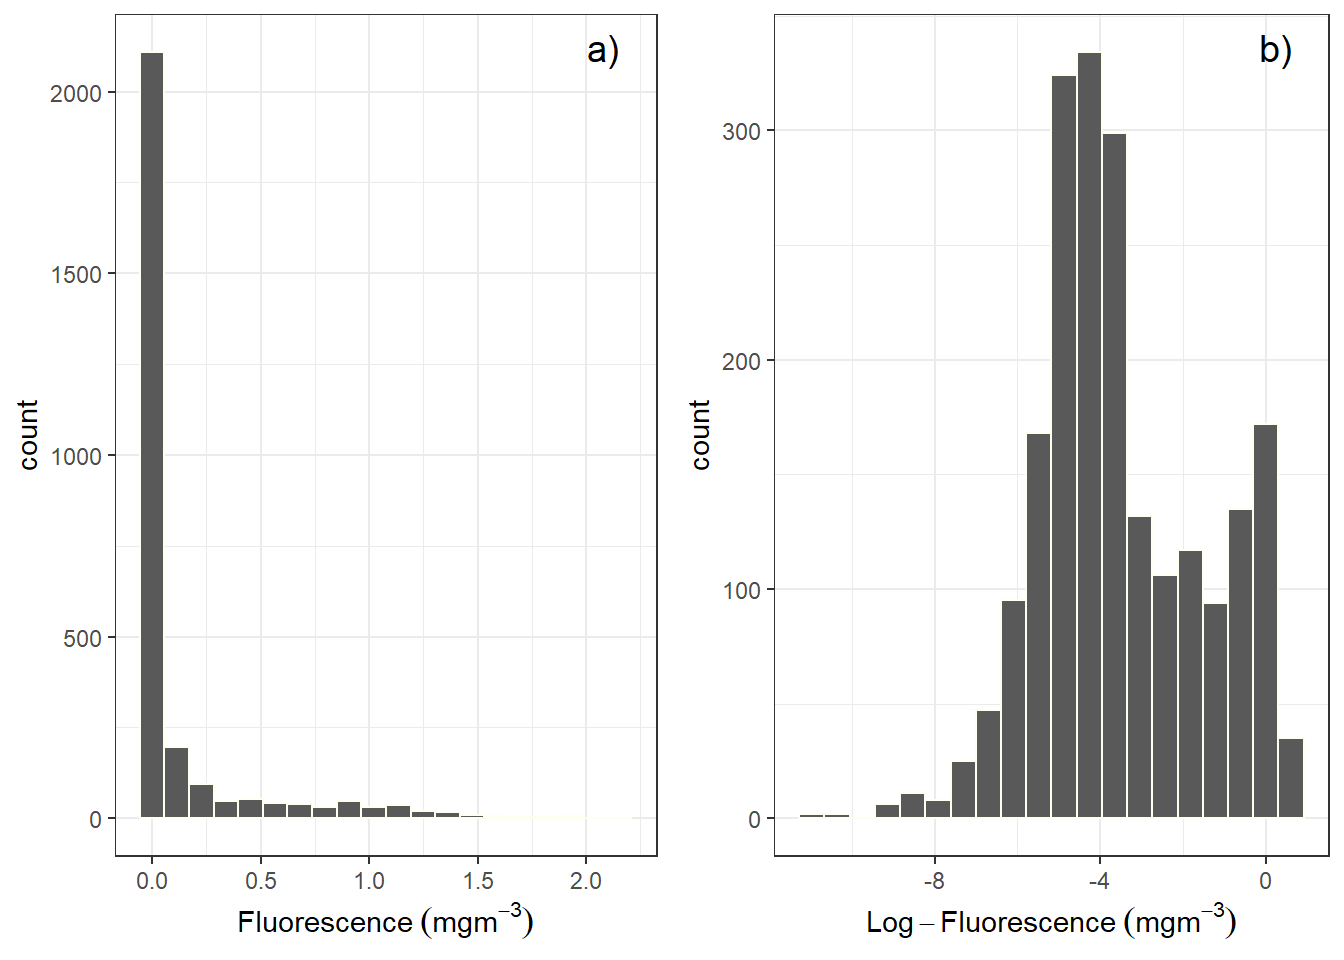 Histogram showing the distribution of a) raw fluorence and b) log-transformed fluorescence values